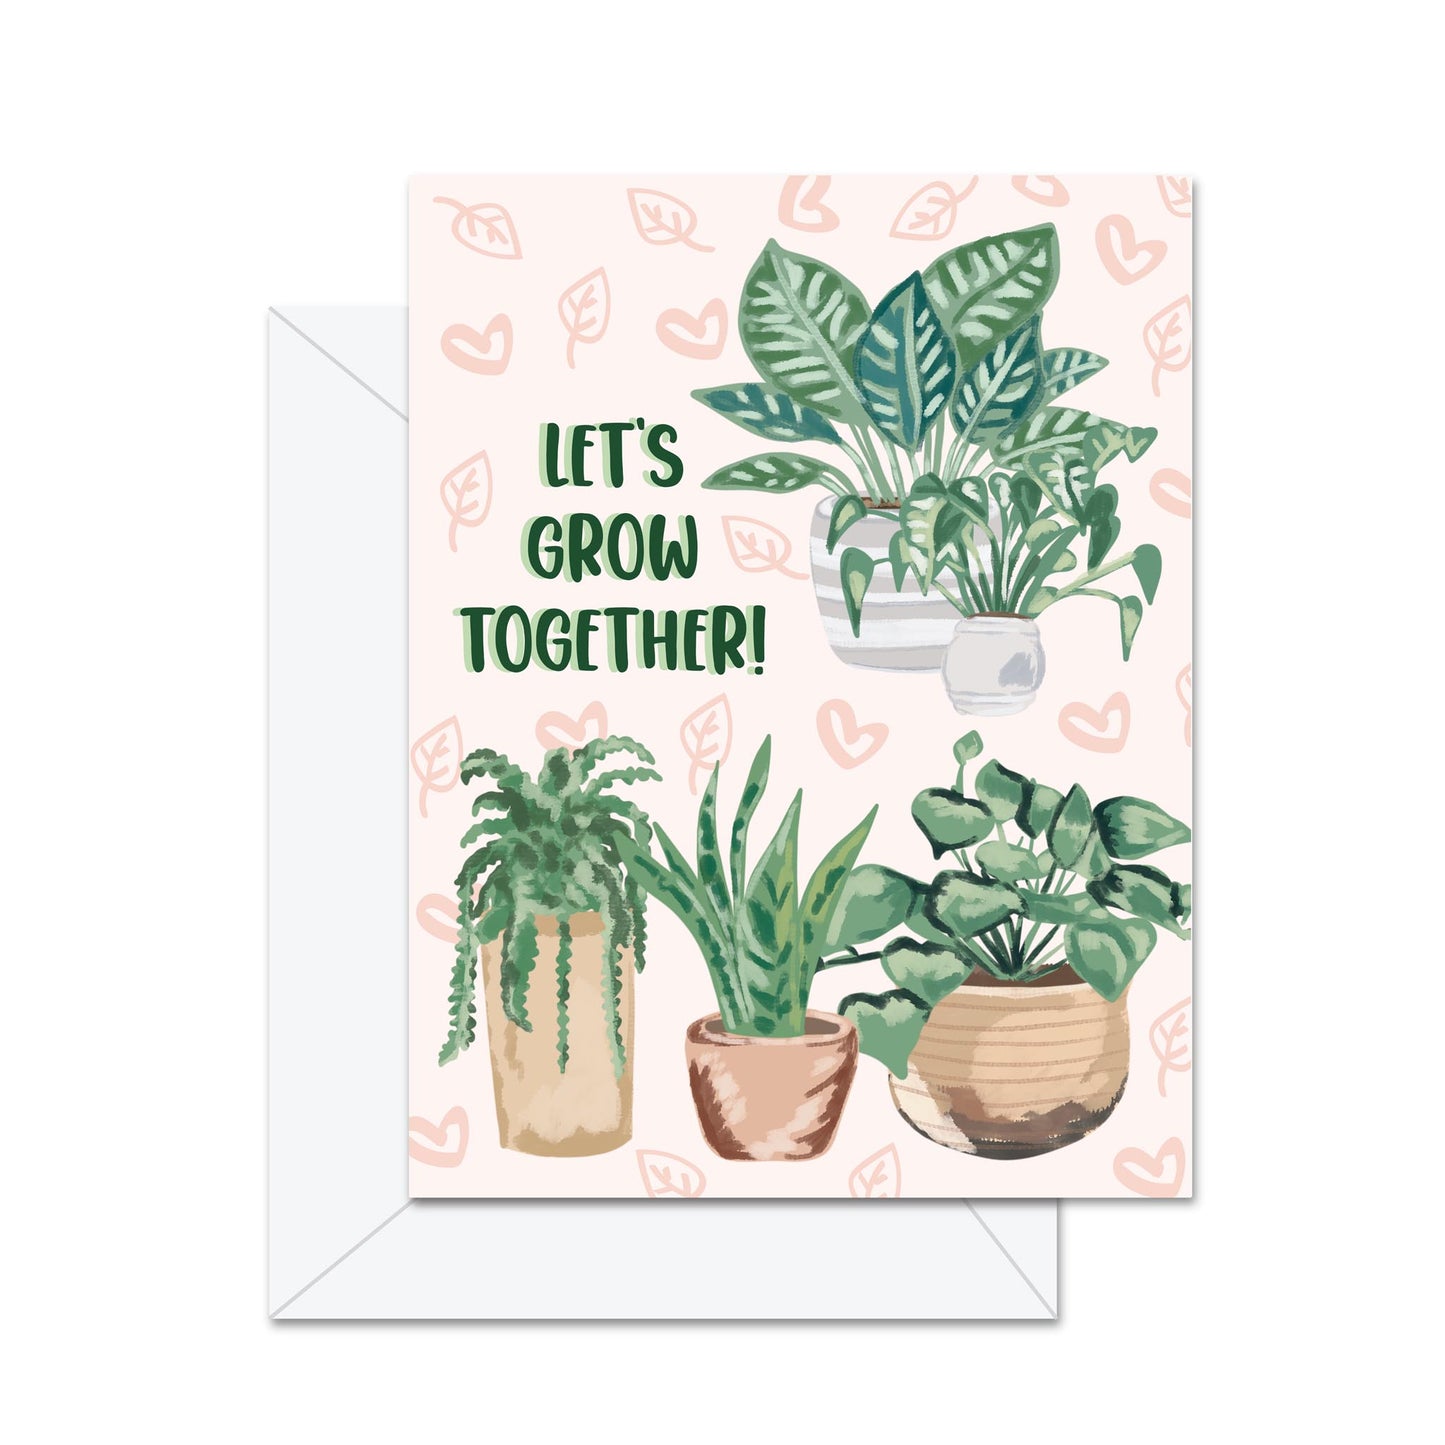 Let's Grow Together! - Greeting Card